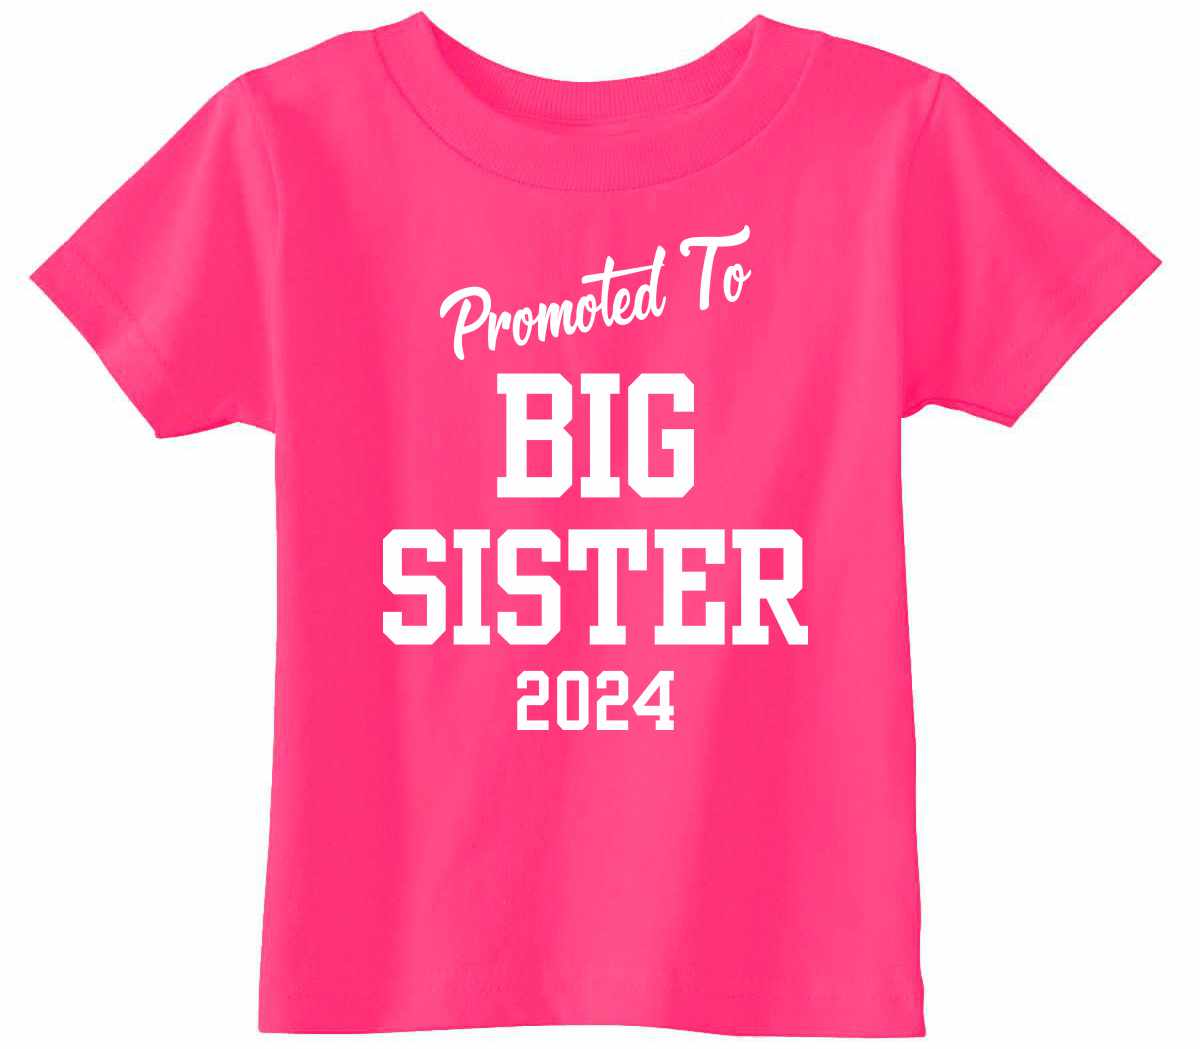 Promoted to Big Sister 2024 on Infant-Toddler T-Shirt (#1364-7)